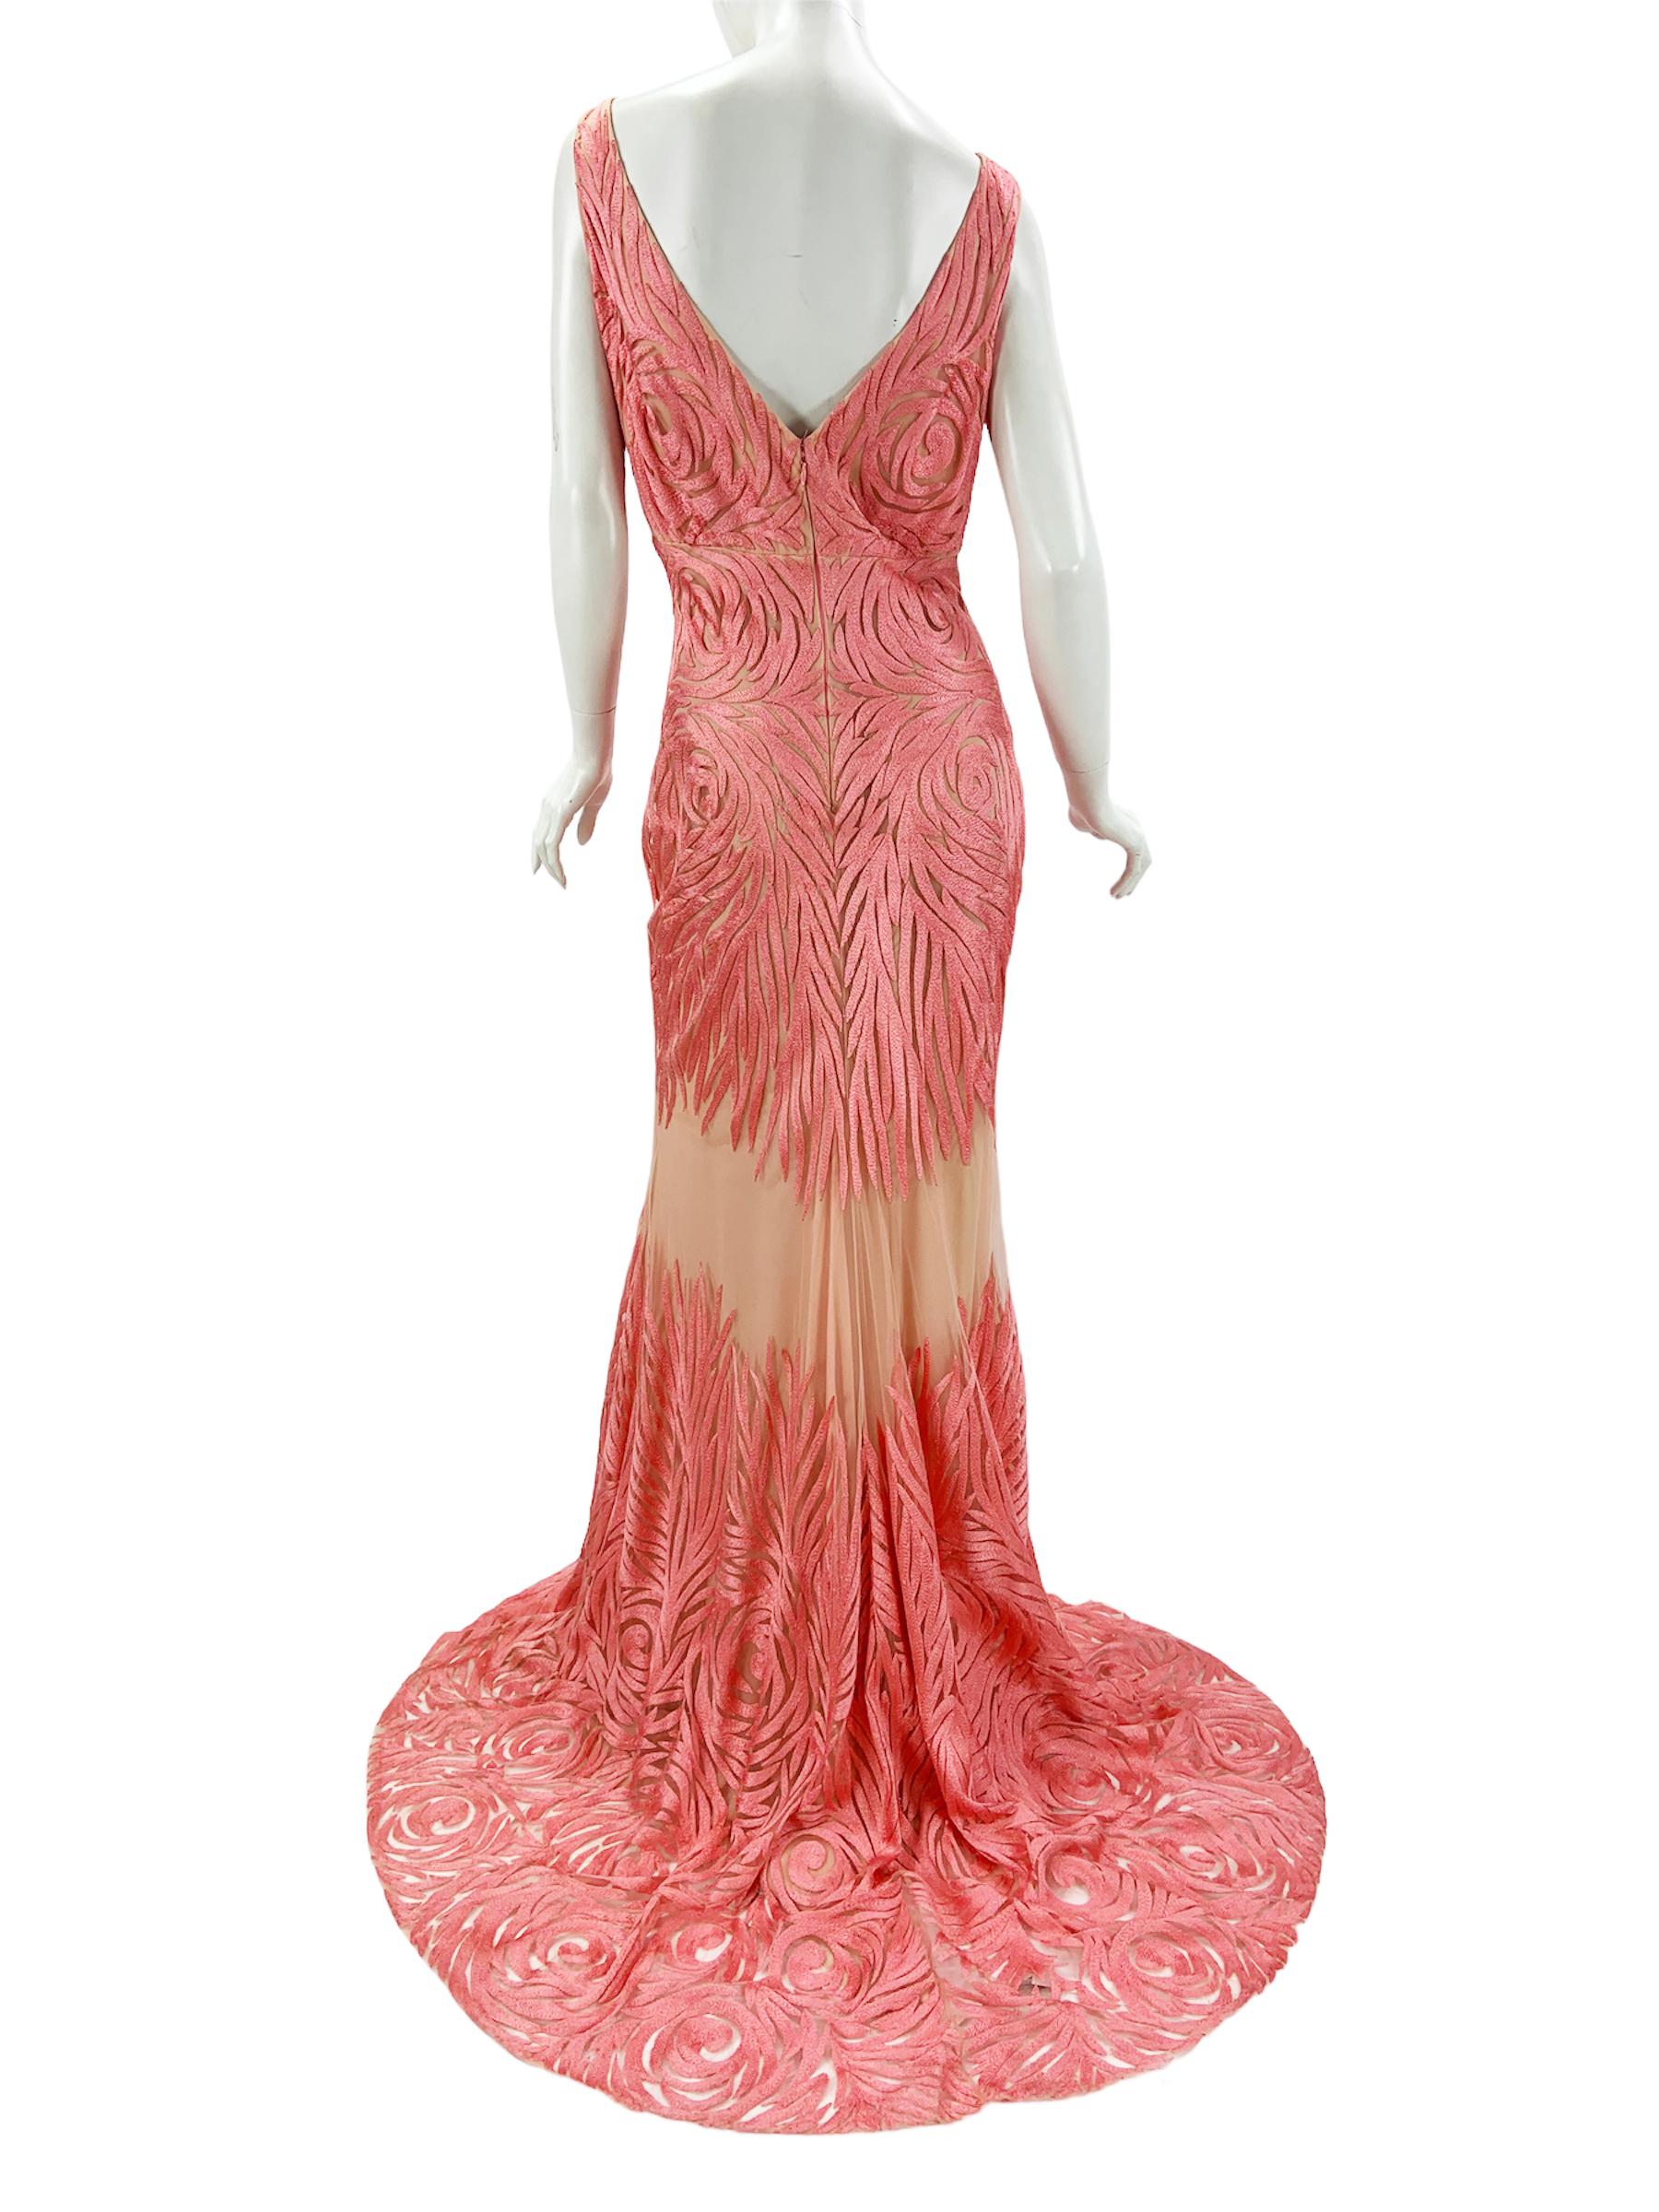 Women's NWT Naeem Khan Silk Tulle Pink Coral Embroidered Dress Gown US size 12  For Sale